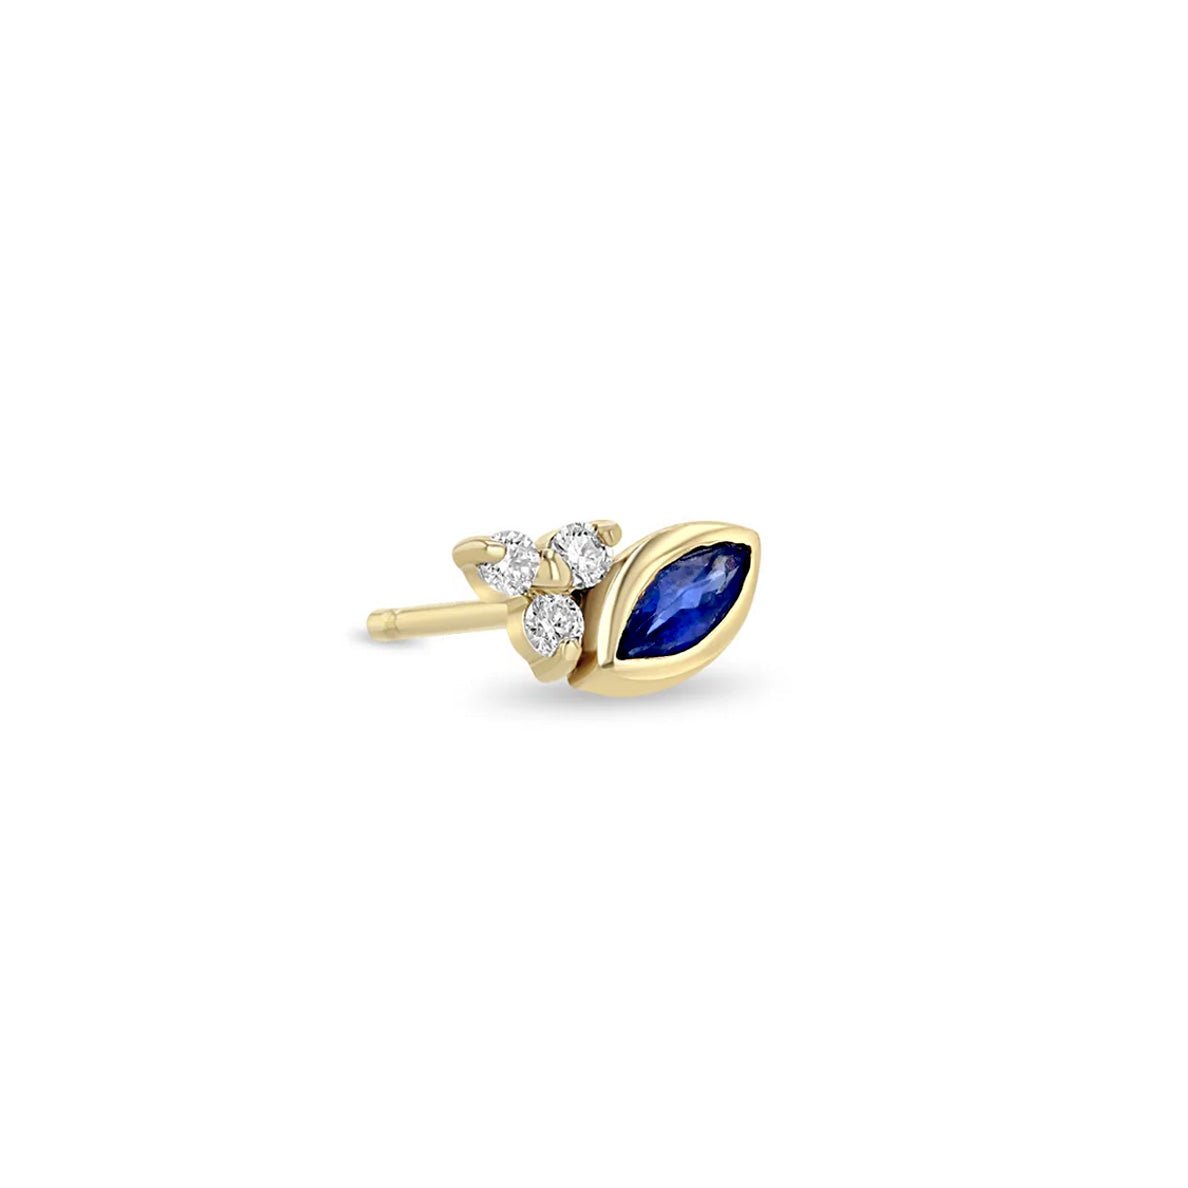 14K Gold Stud Earring With Marquise Blue Sapphire and Three Diamonds - Peridot Fine Jewelry - Zoe Chicco